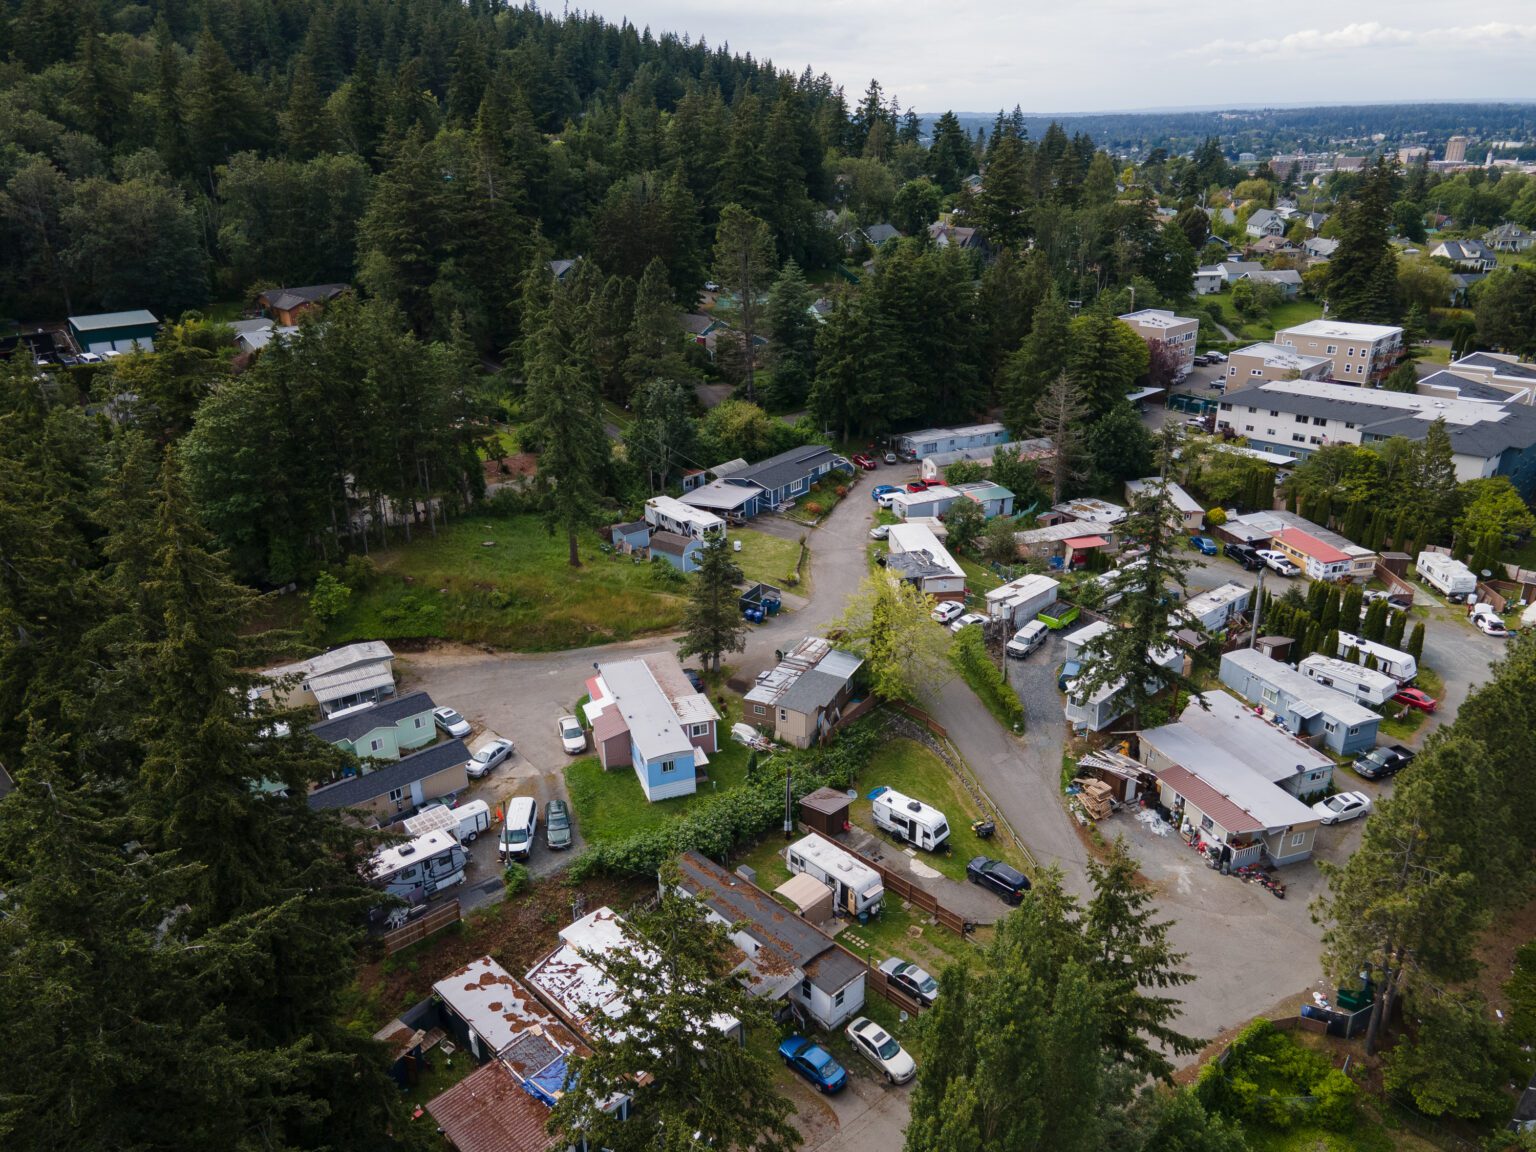 The Bellingham Planning Commission voted July 7 to include Samish Mobile Home Park among 10 such parks that would be shielded from redevelopment to preserve affordable housing. The Samish park's owner had asked to be excluded from the proposed rules so he could build new residences there